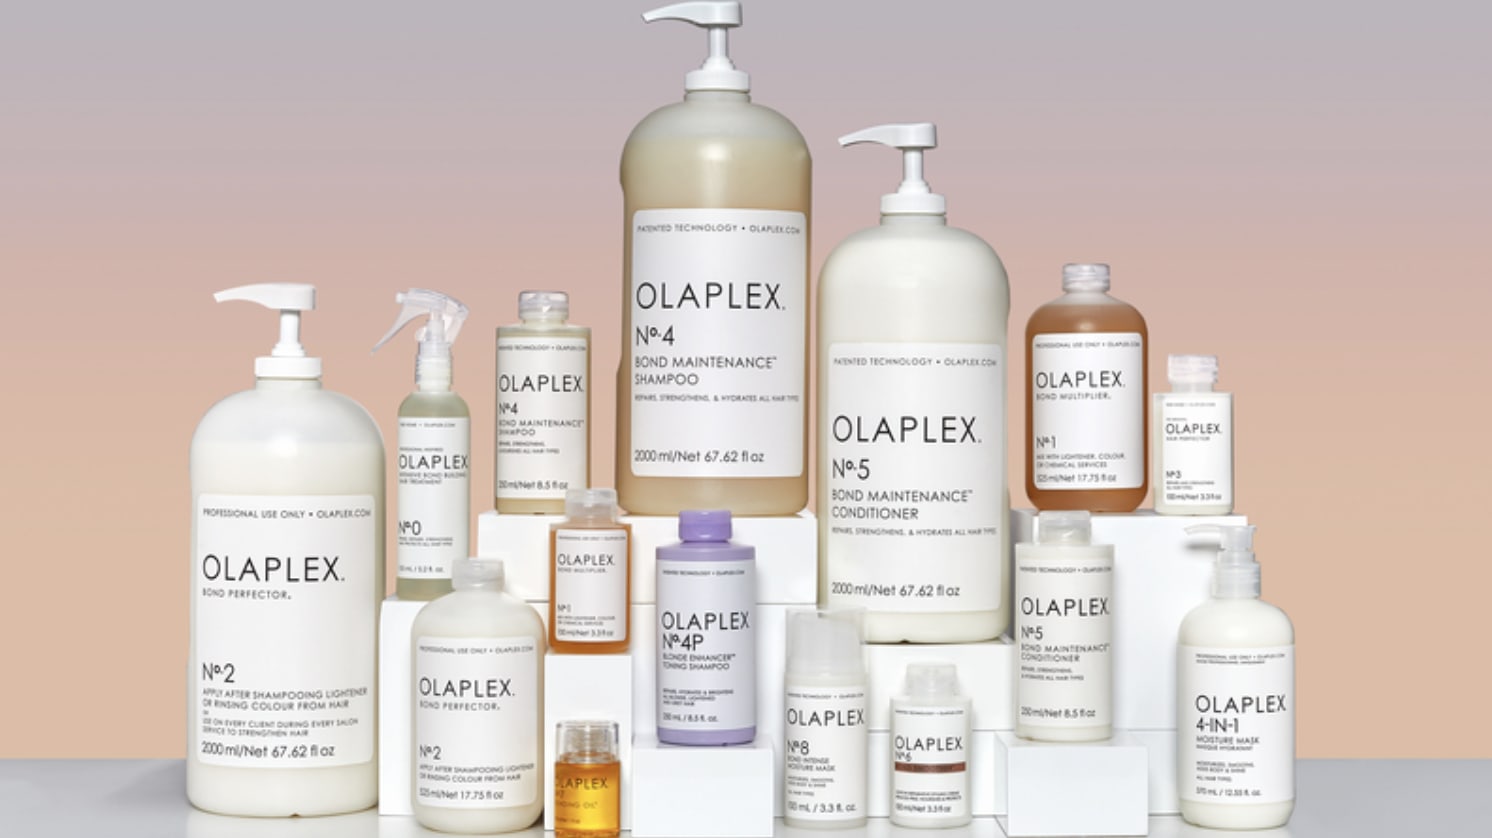 Family Office for Chanel Billionaires Cashes In on Olaplex IPO